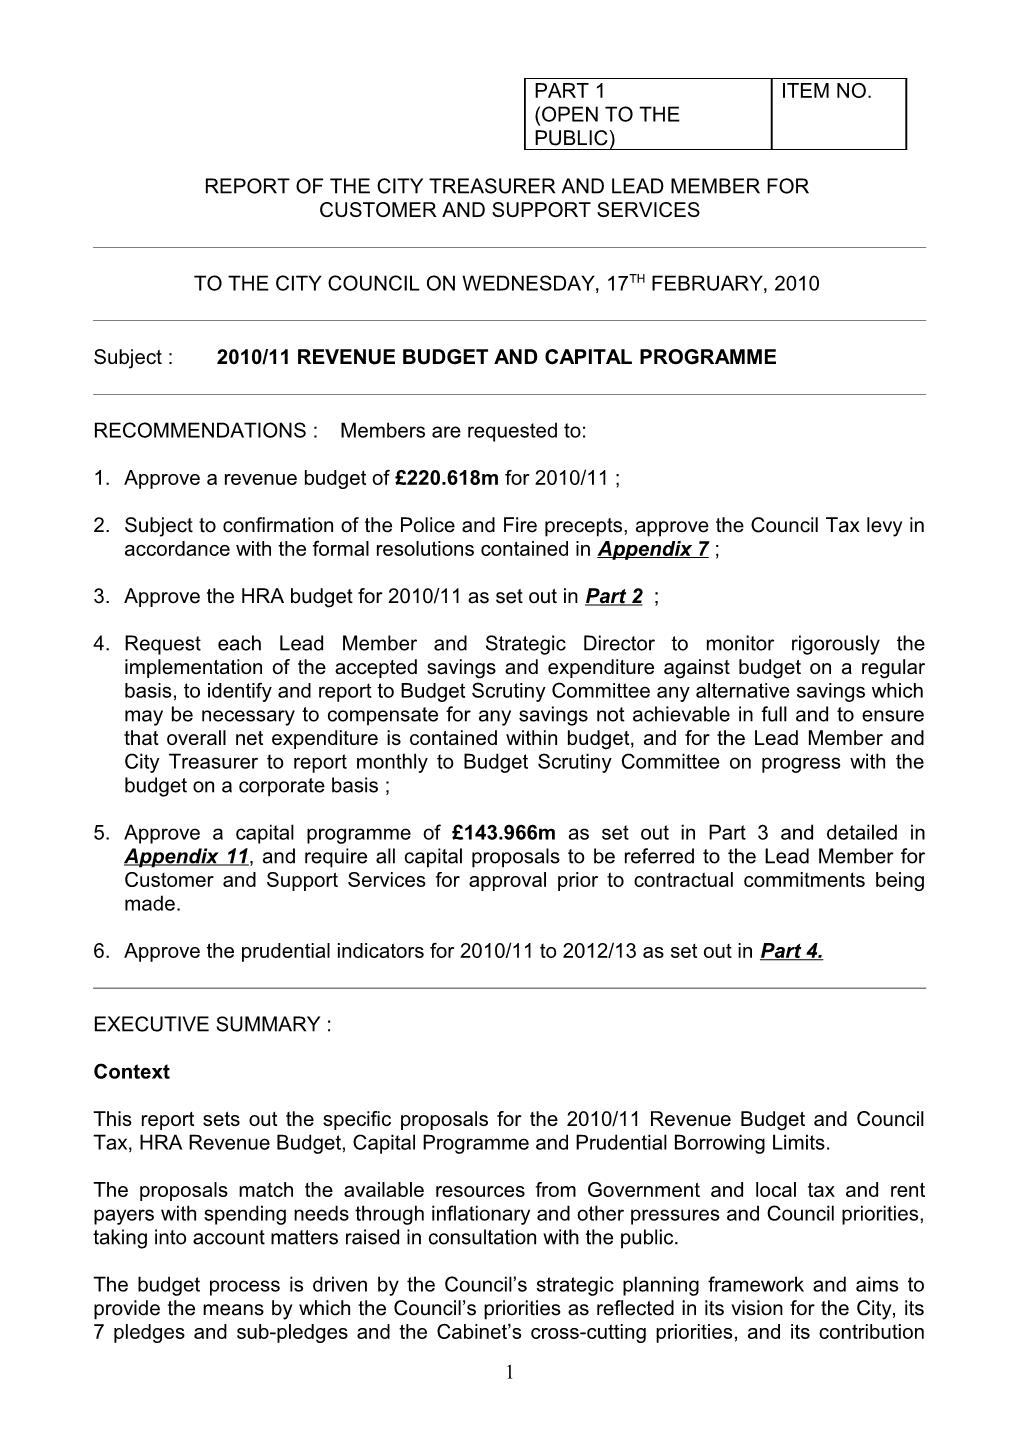 Report of the City Treasurer and Lead Member For